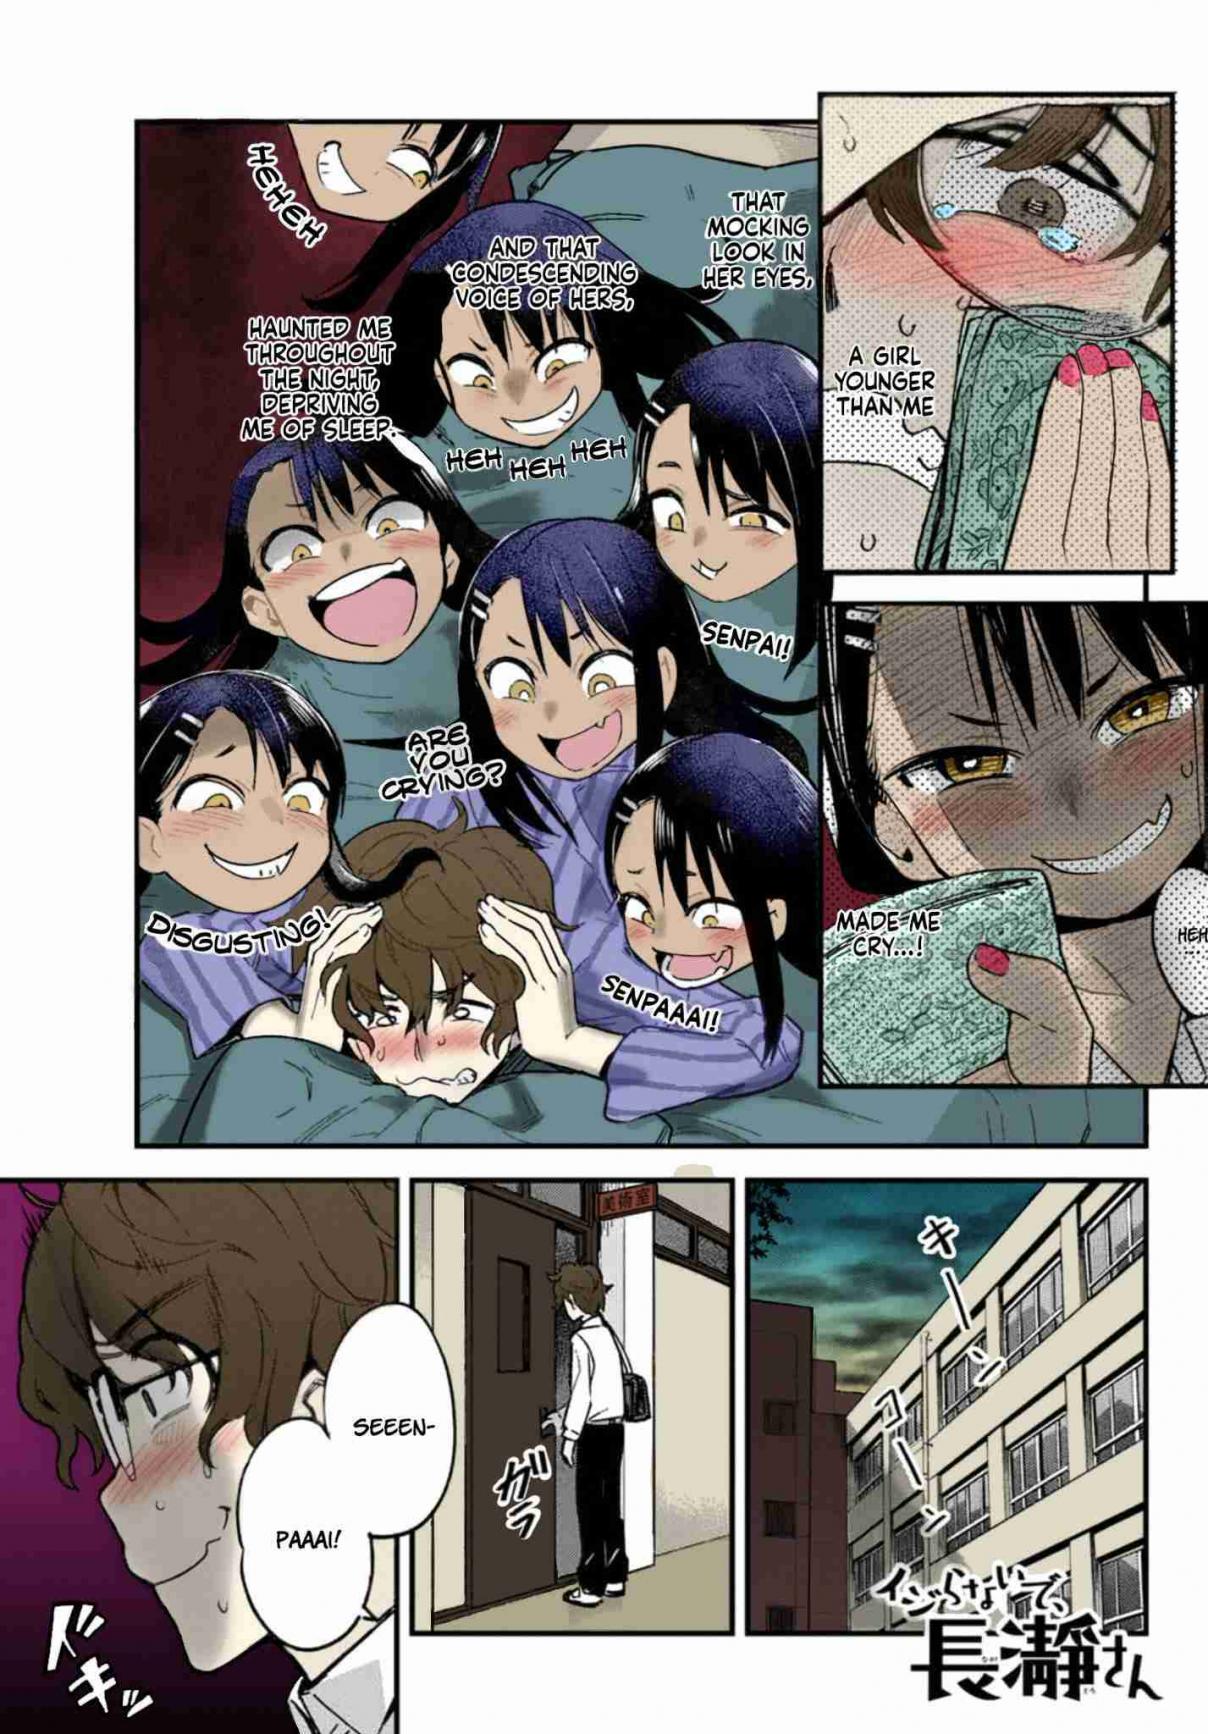 Ijiranaide, Nagatoro san (Fan Colored) Vol. 1 Ch. 2 "Watching you is so fun!" (Unfinished ver.)